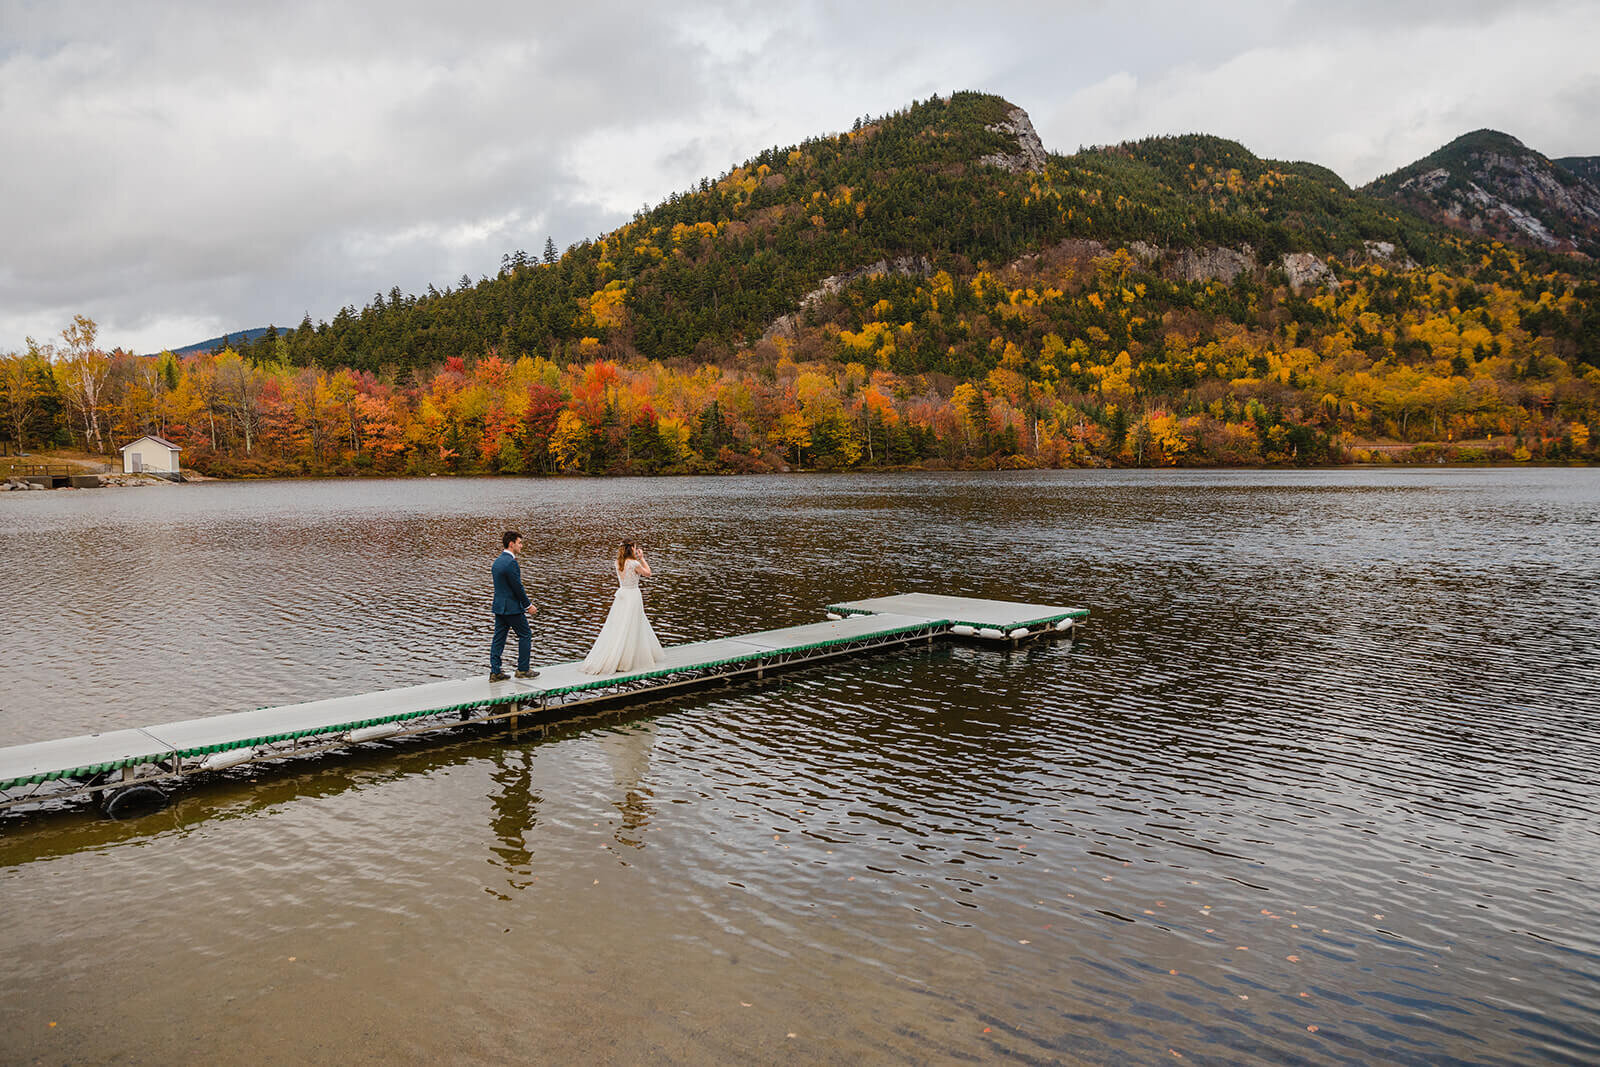  Couple explores the beach in the rainy misty weather in Franconia Notch State Park in New Hampshire after their elopement ceremony. New Hampshire elopement packages. 